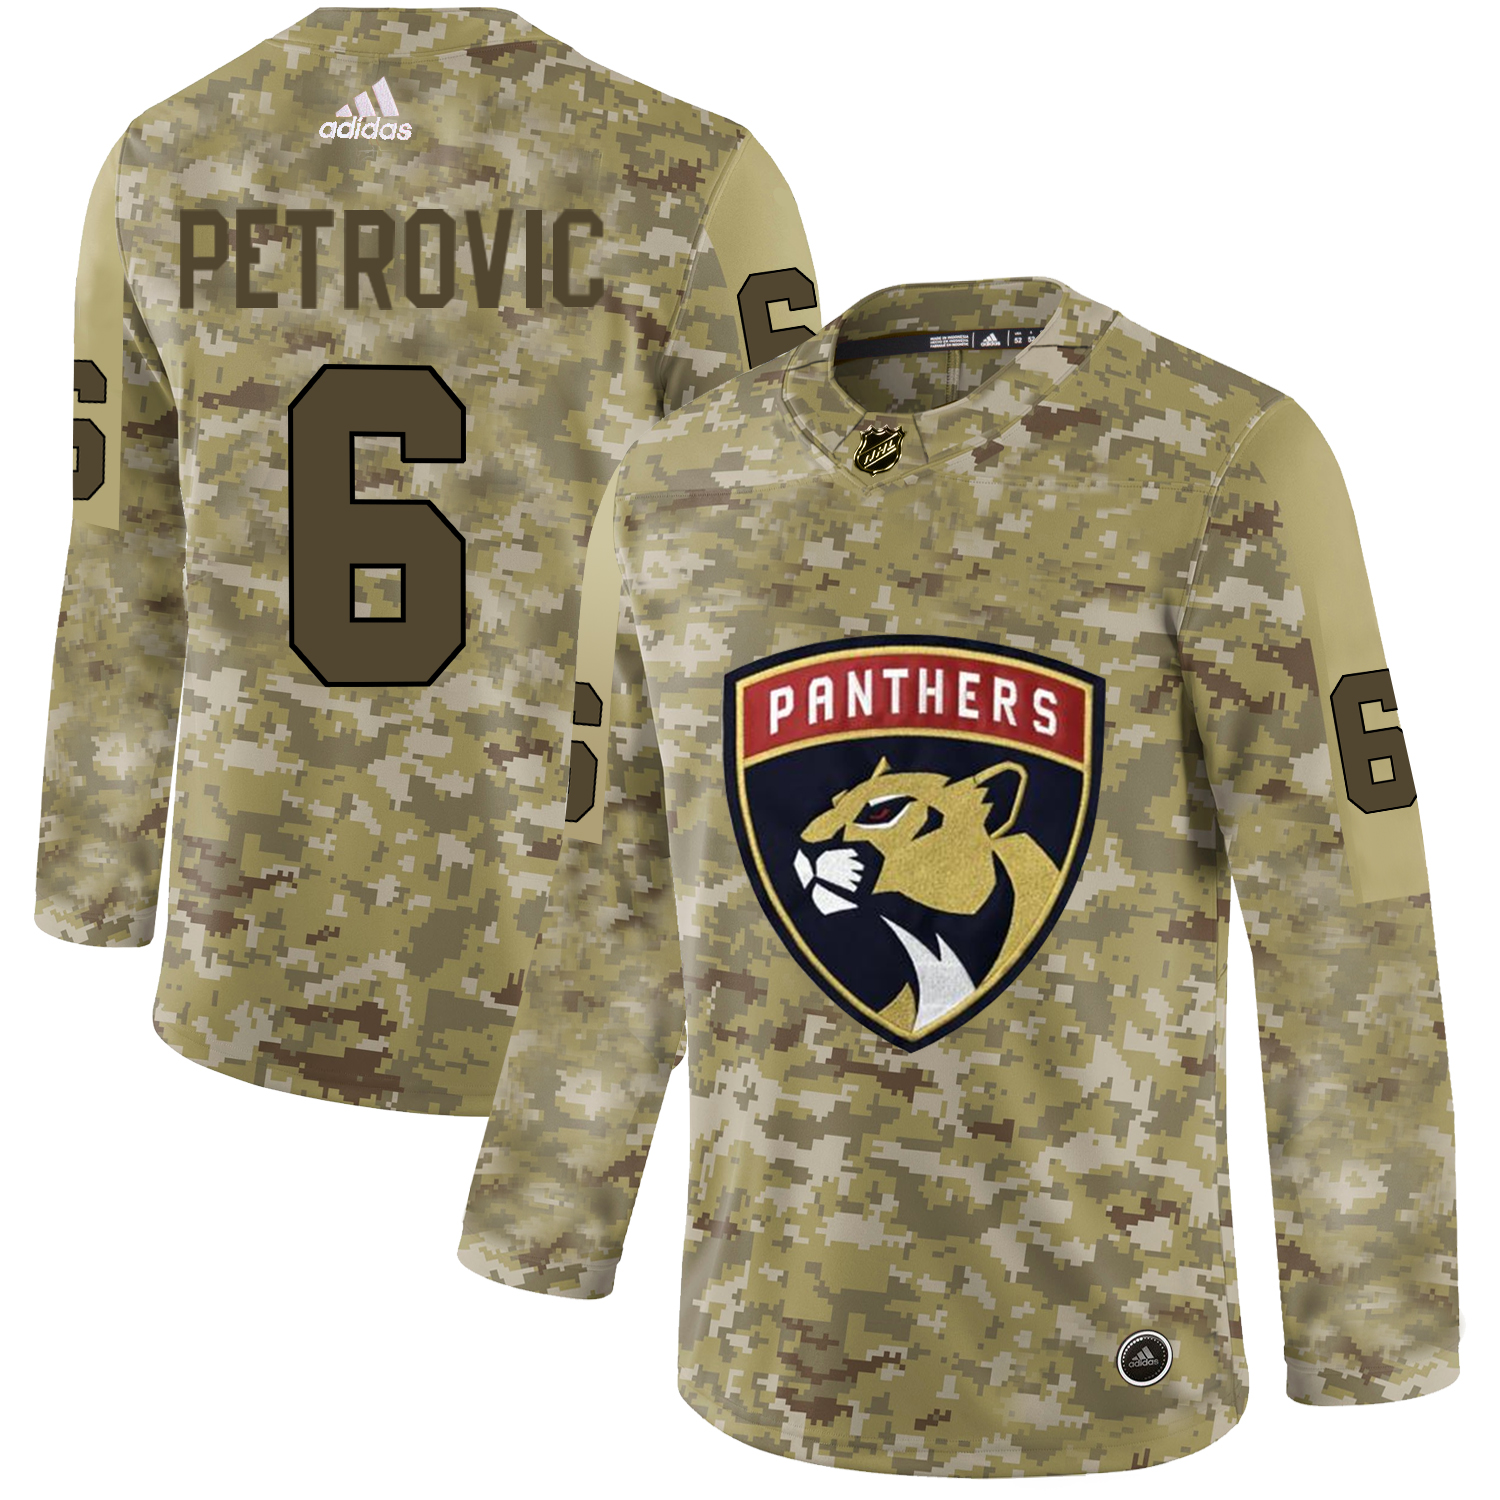 Adidas Panthers #6 Alexander Petrovic Camo Authentic Stitched NHL Jersey